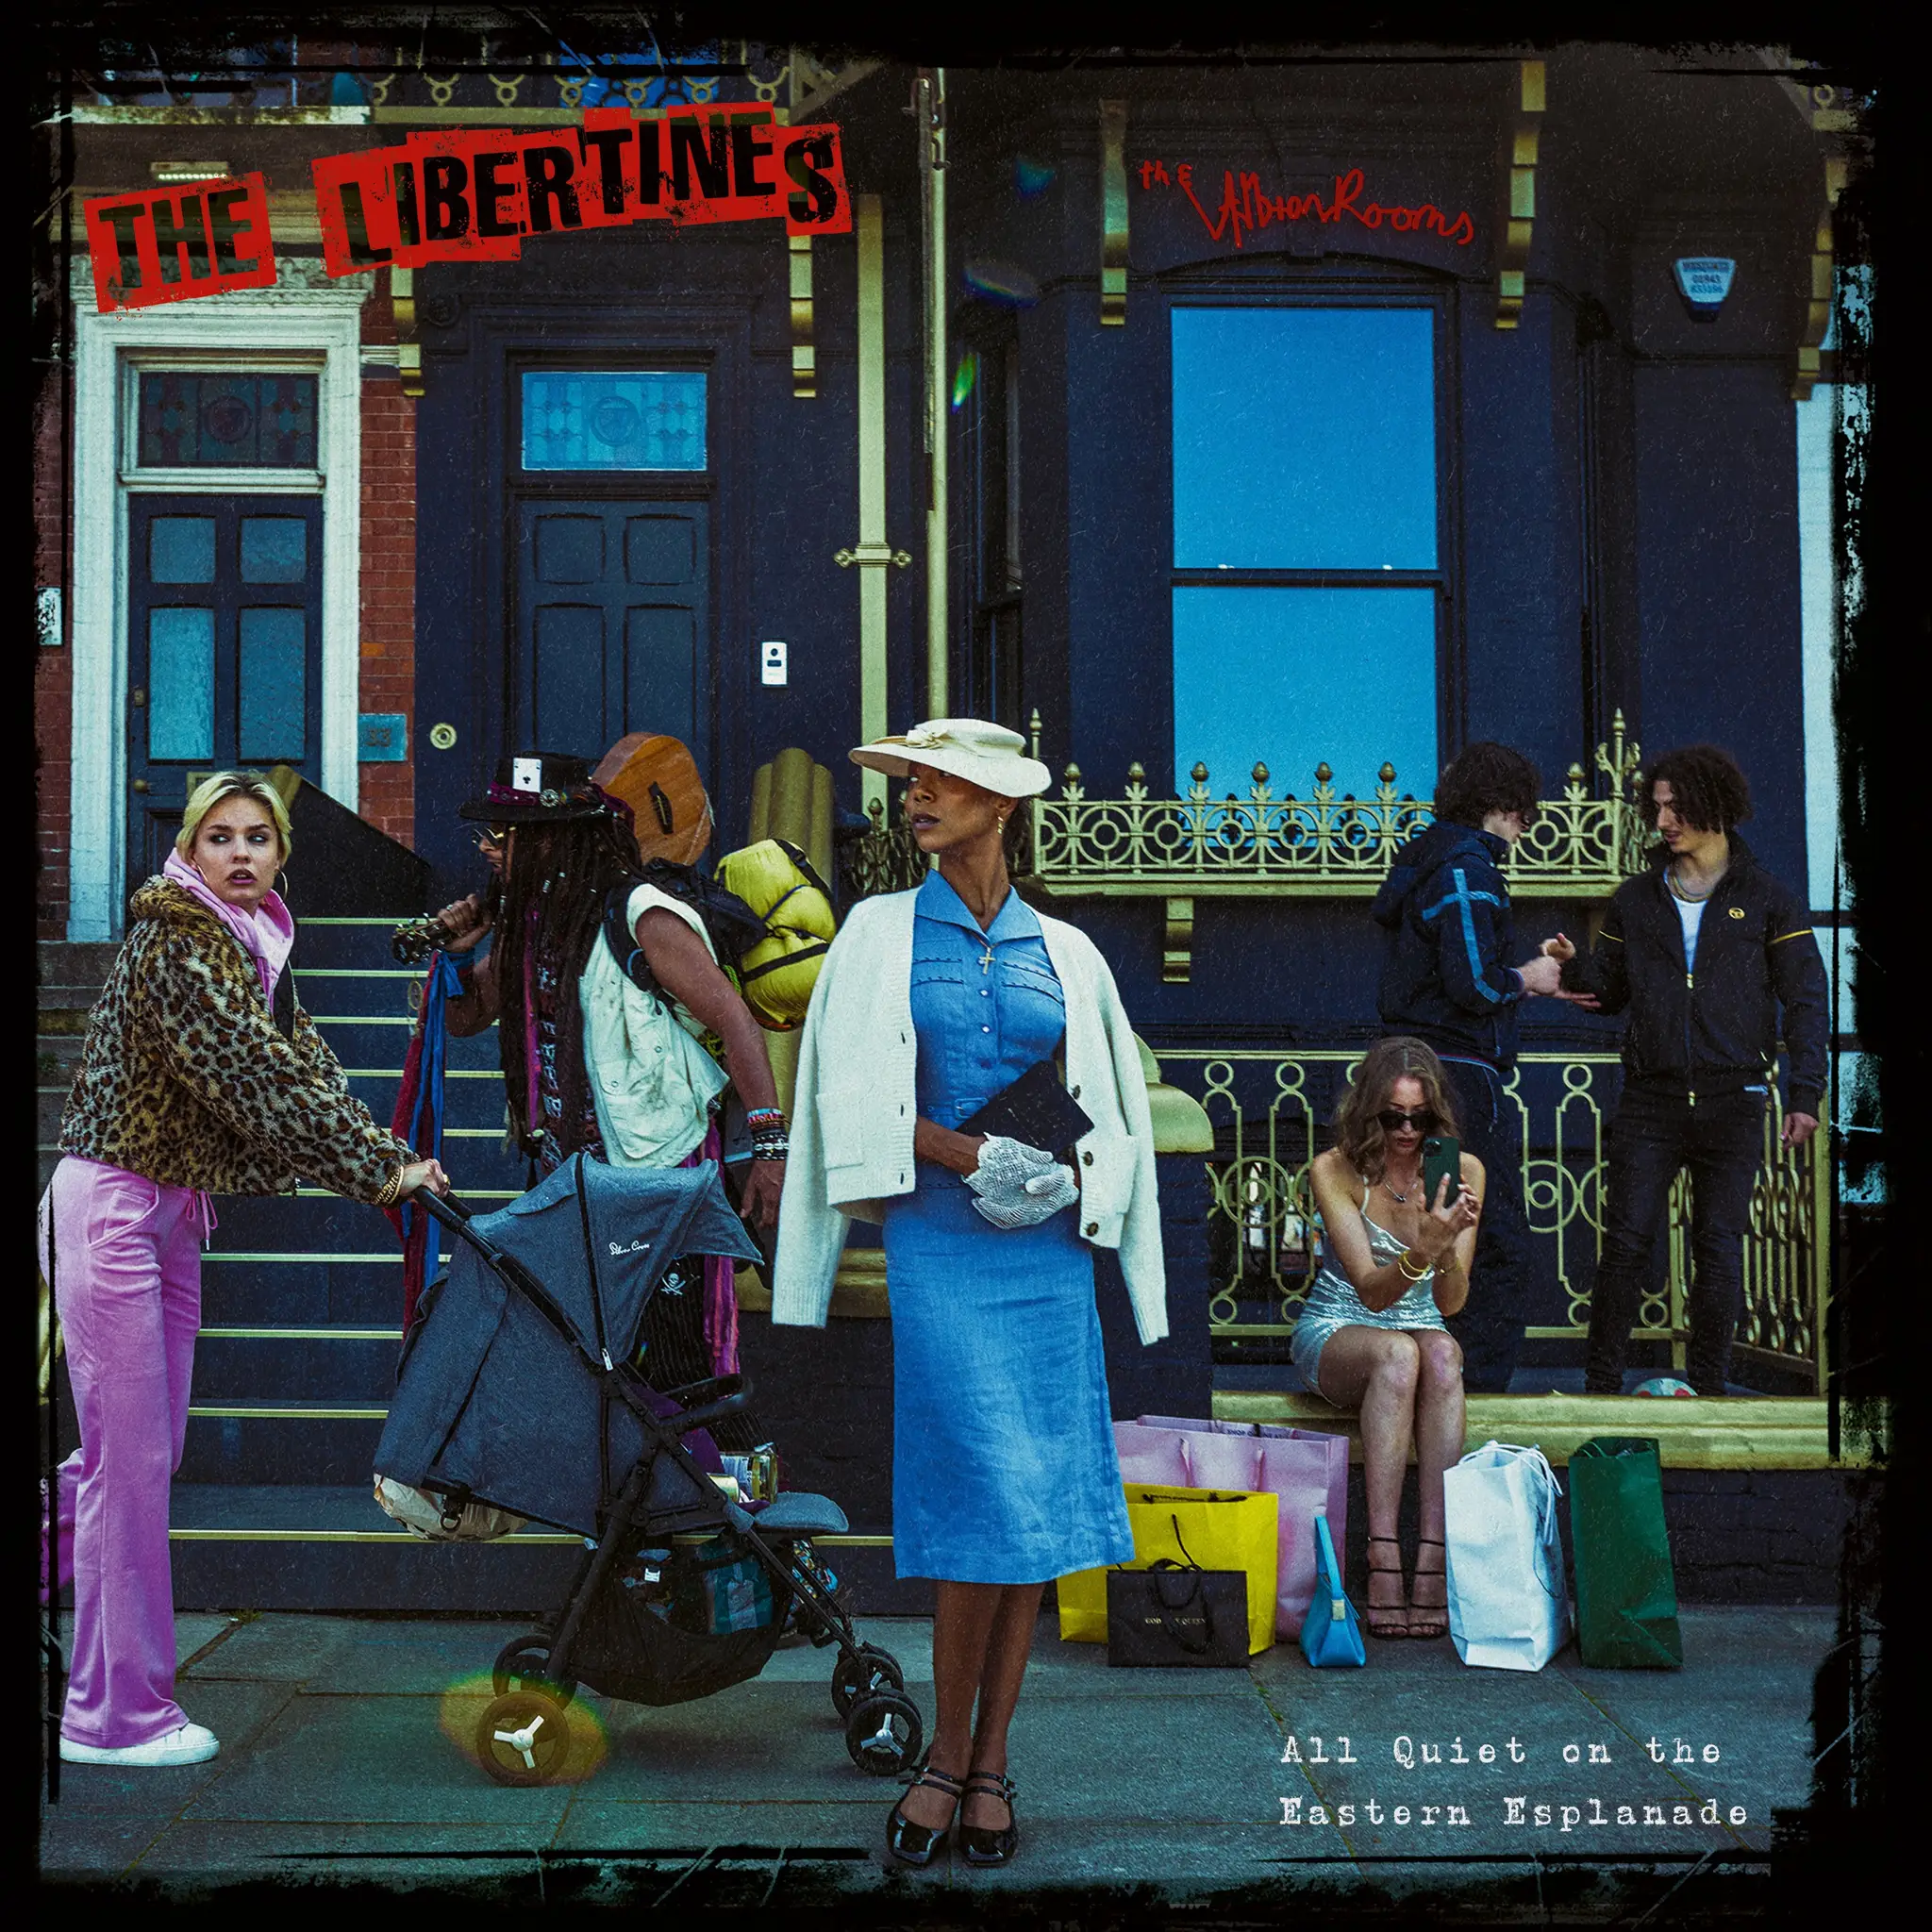 <strong>The Libertines - All Quiet On The Eastern Esplanade</strong> (Vinyl LP - black)